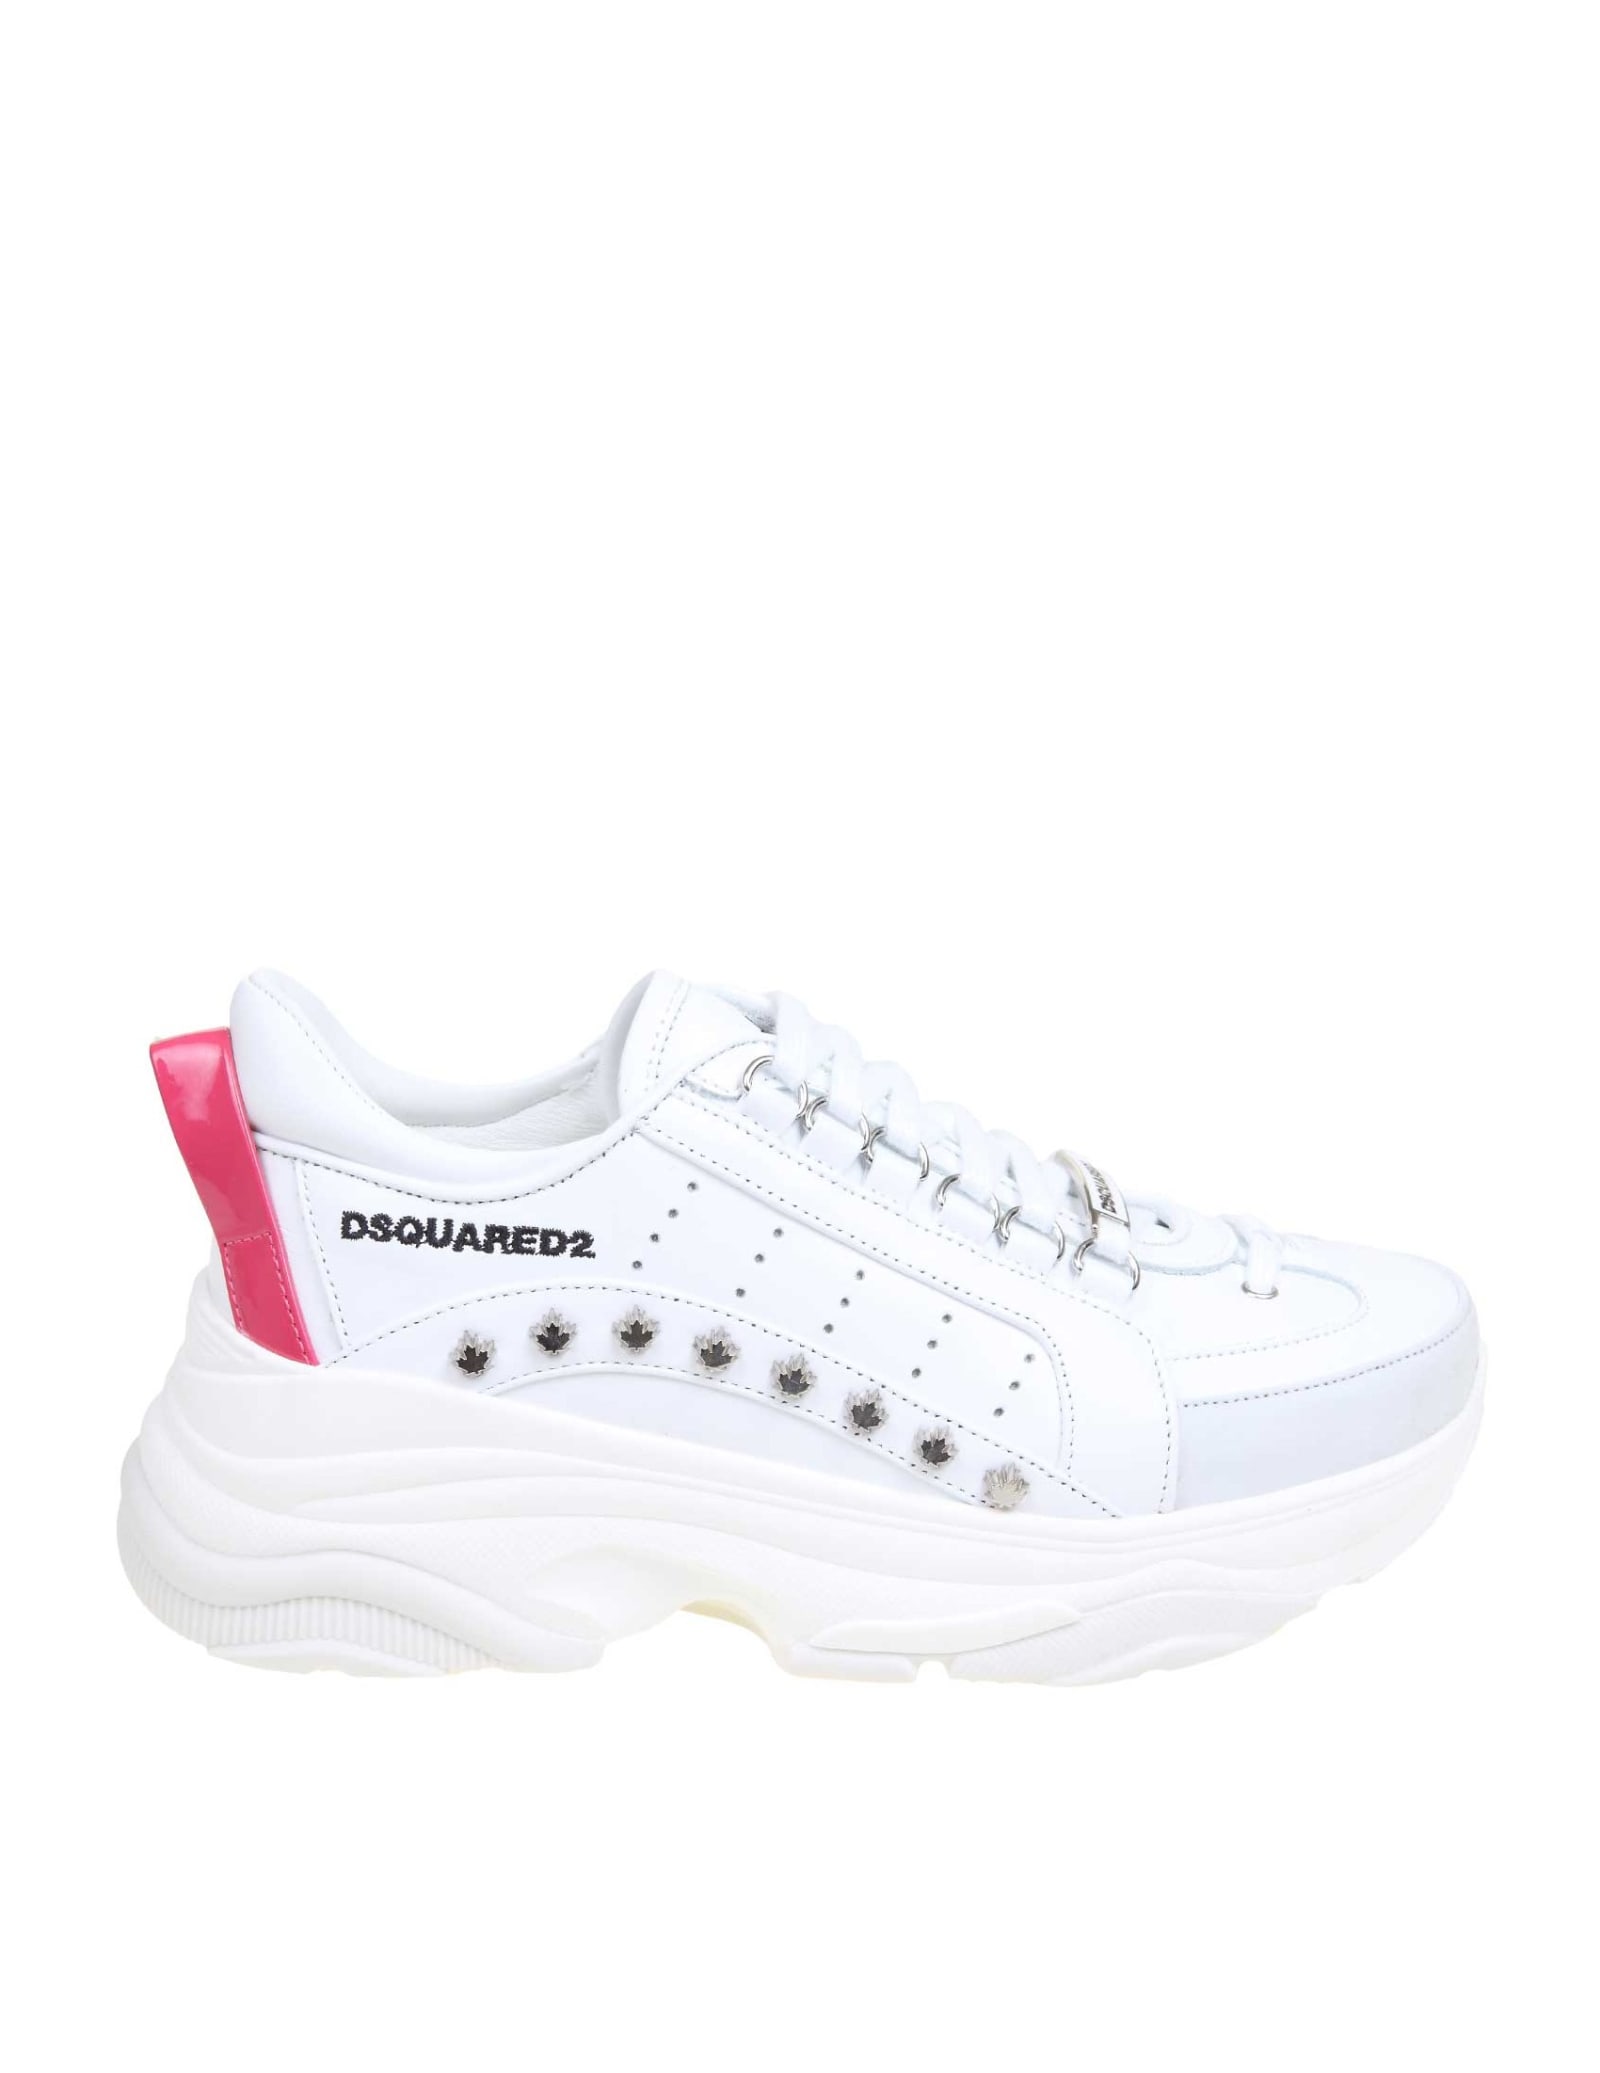 DSQUARED2 DSQUARED SNEAKERS BUMPY 551 IN WHITE LEATHER,11234137